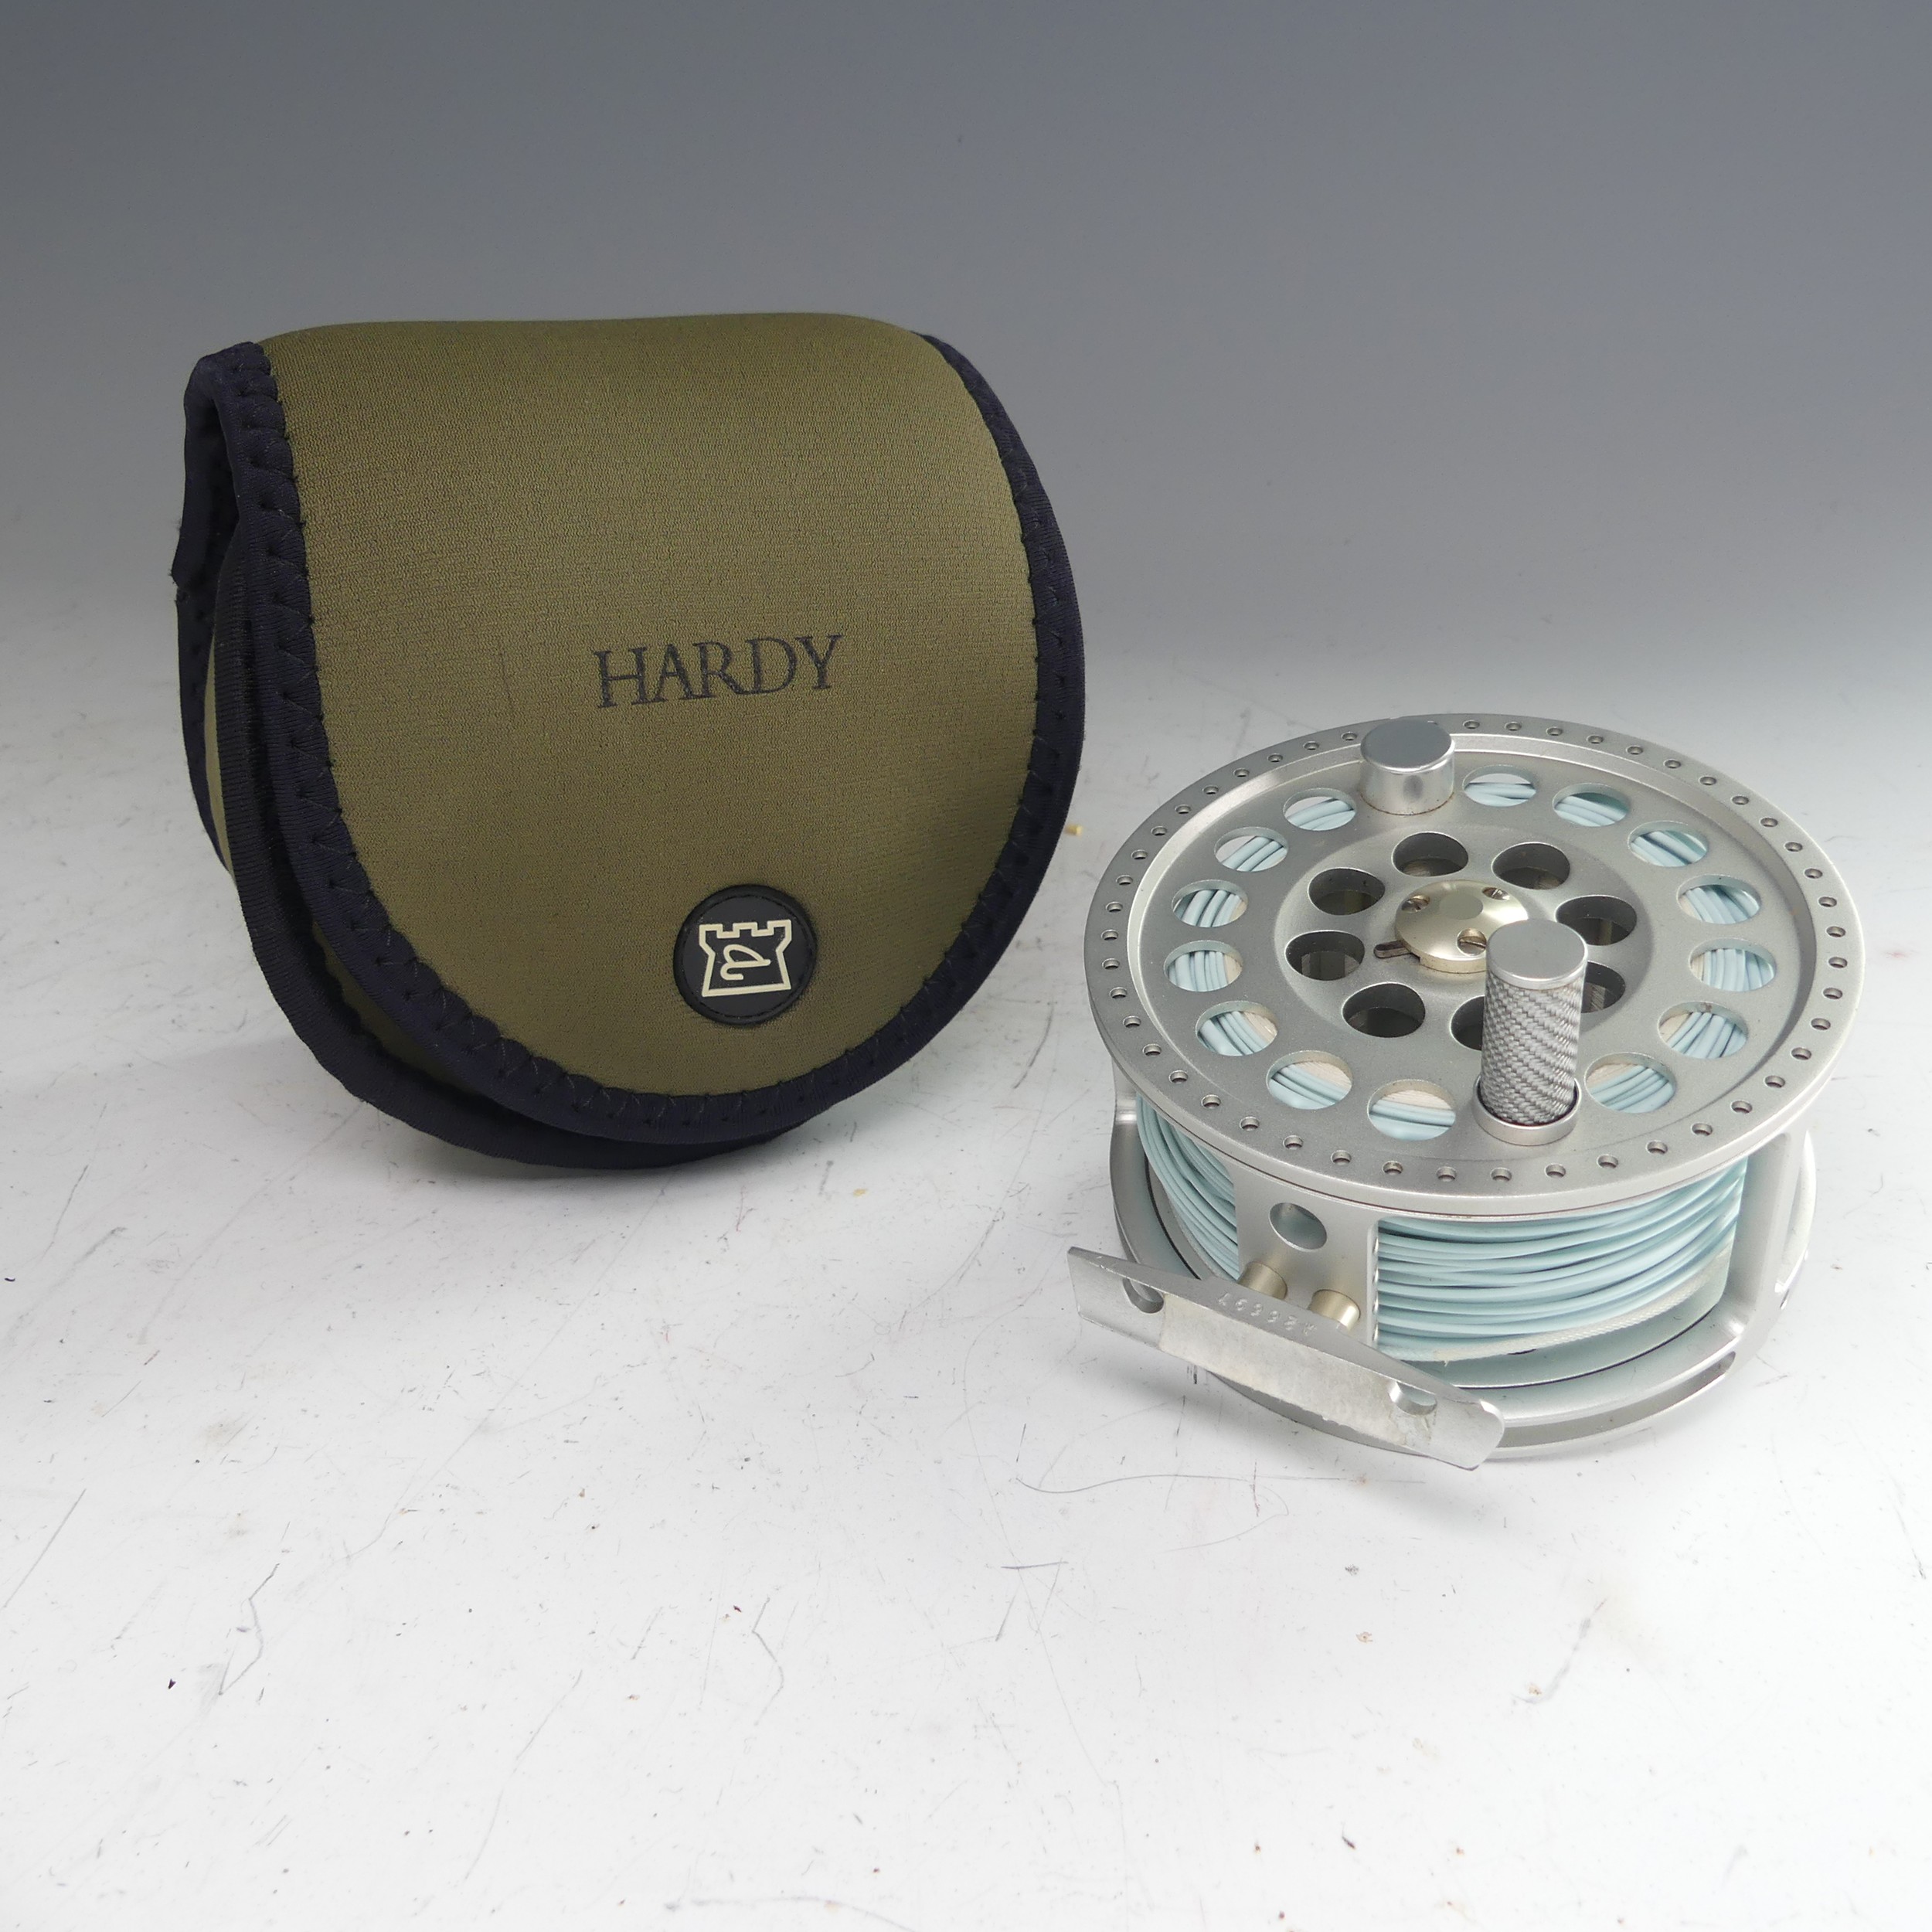 A Hardy Angel 11/12 fishing Reel, no. A26697, with Hardy pouch, 11.5cm diameter. - Image 3 of 8